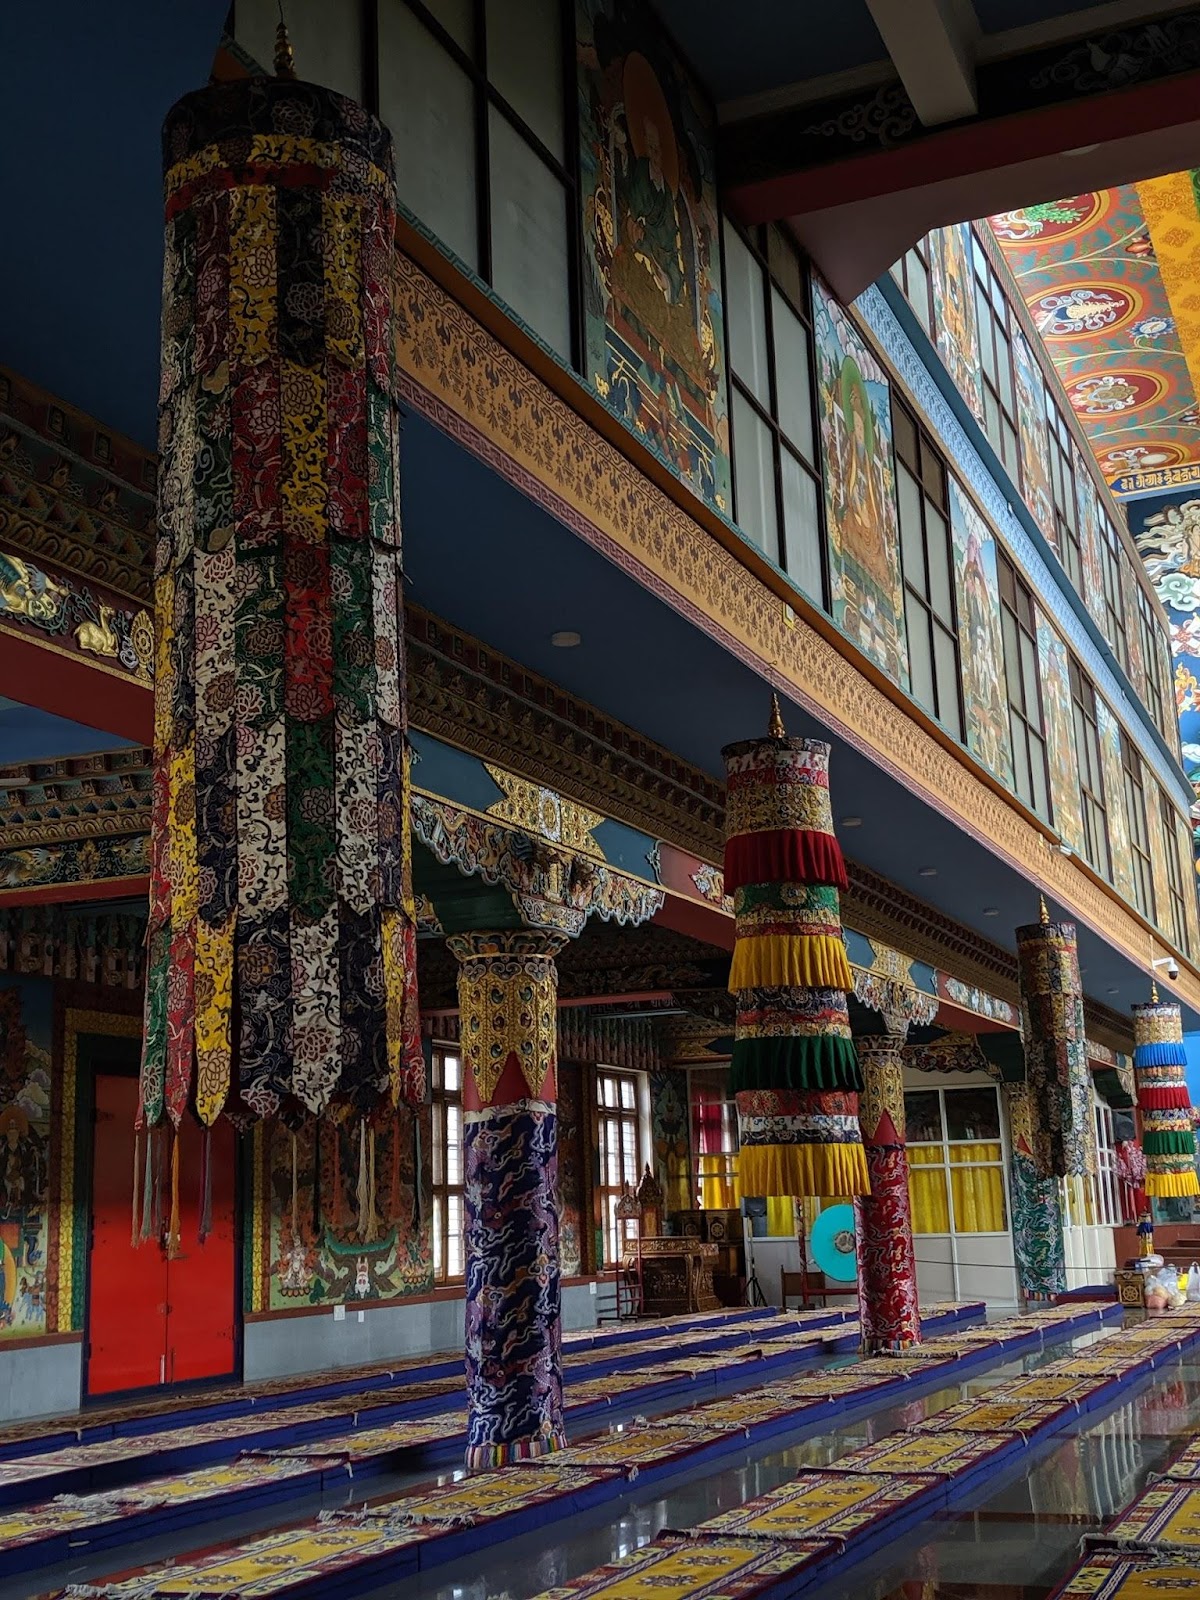 Namdring monastery images